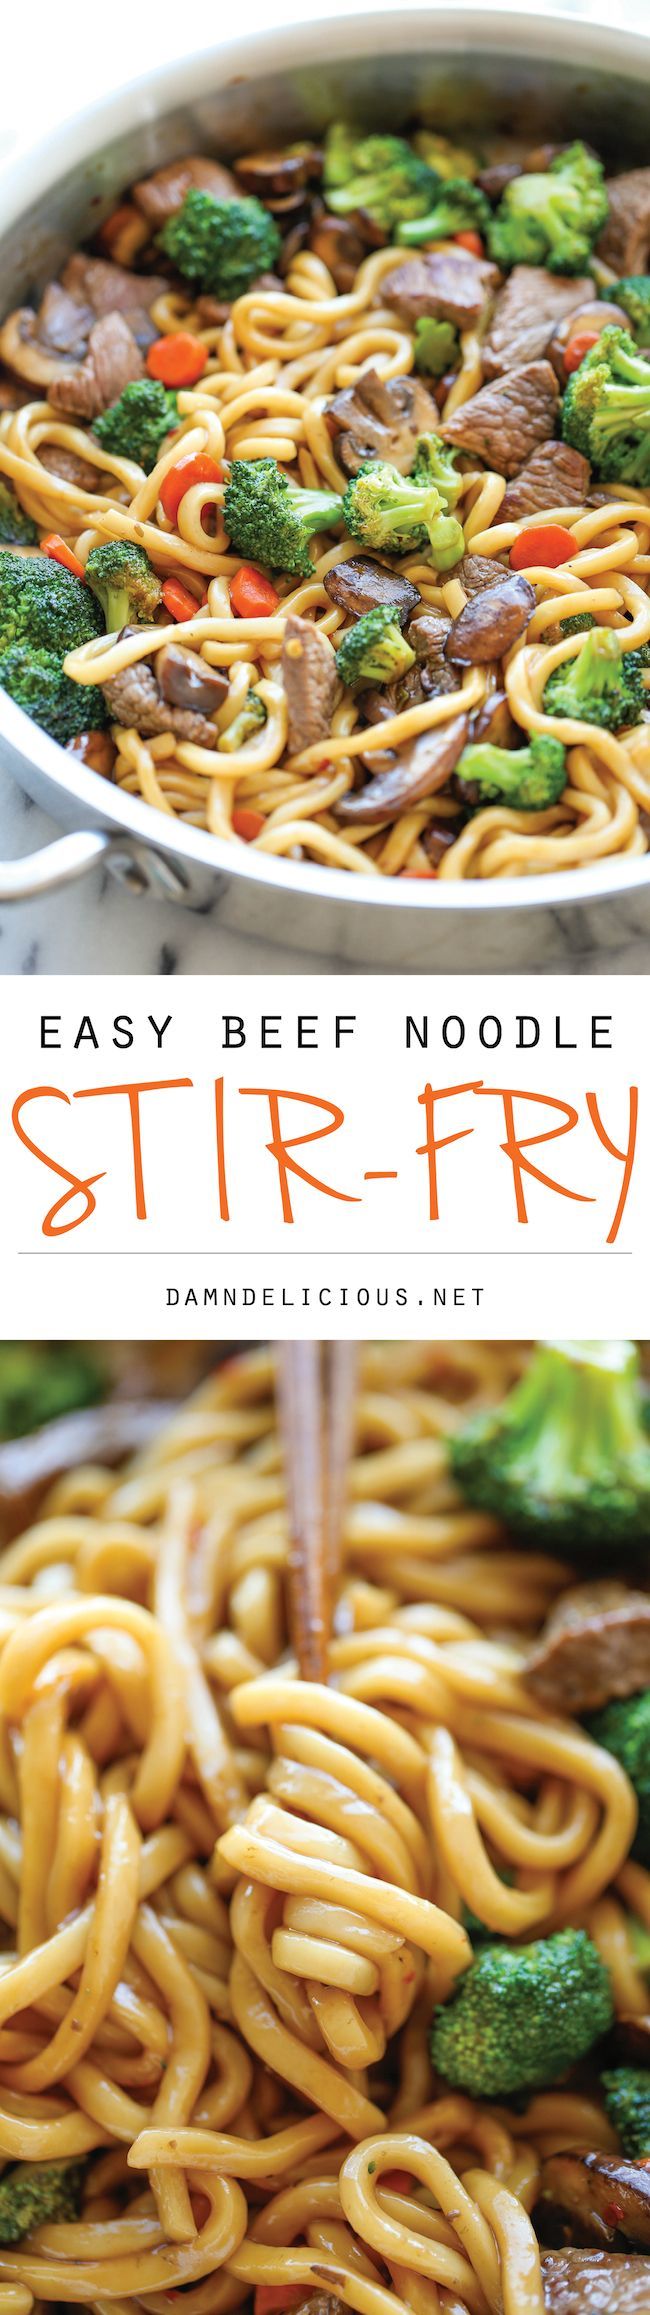 Beef Noodle Stir Fry – The easiest stir fry ever! And you can add in your favorite veggies, making this to be the perfect clean-out-the-fridge type